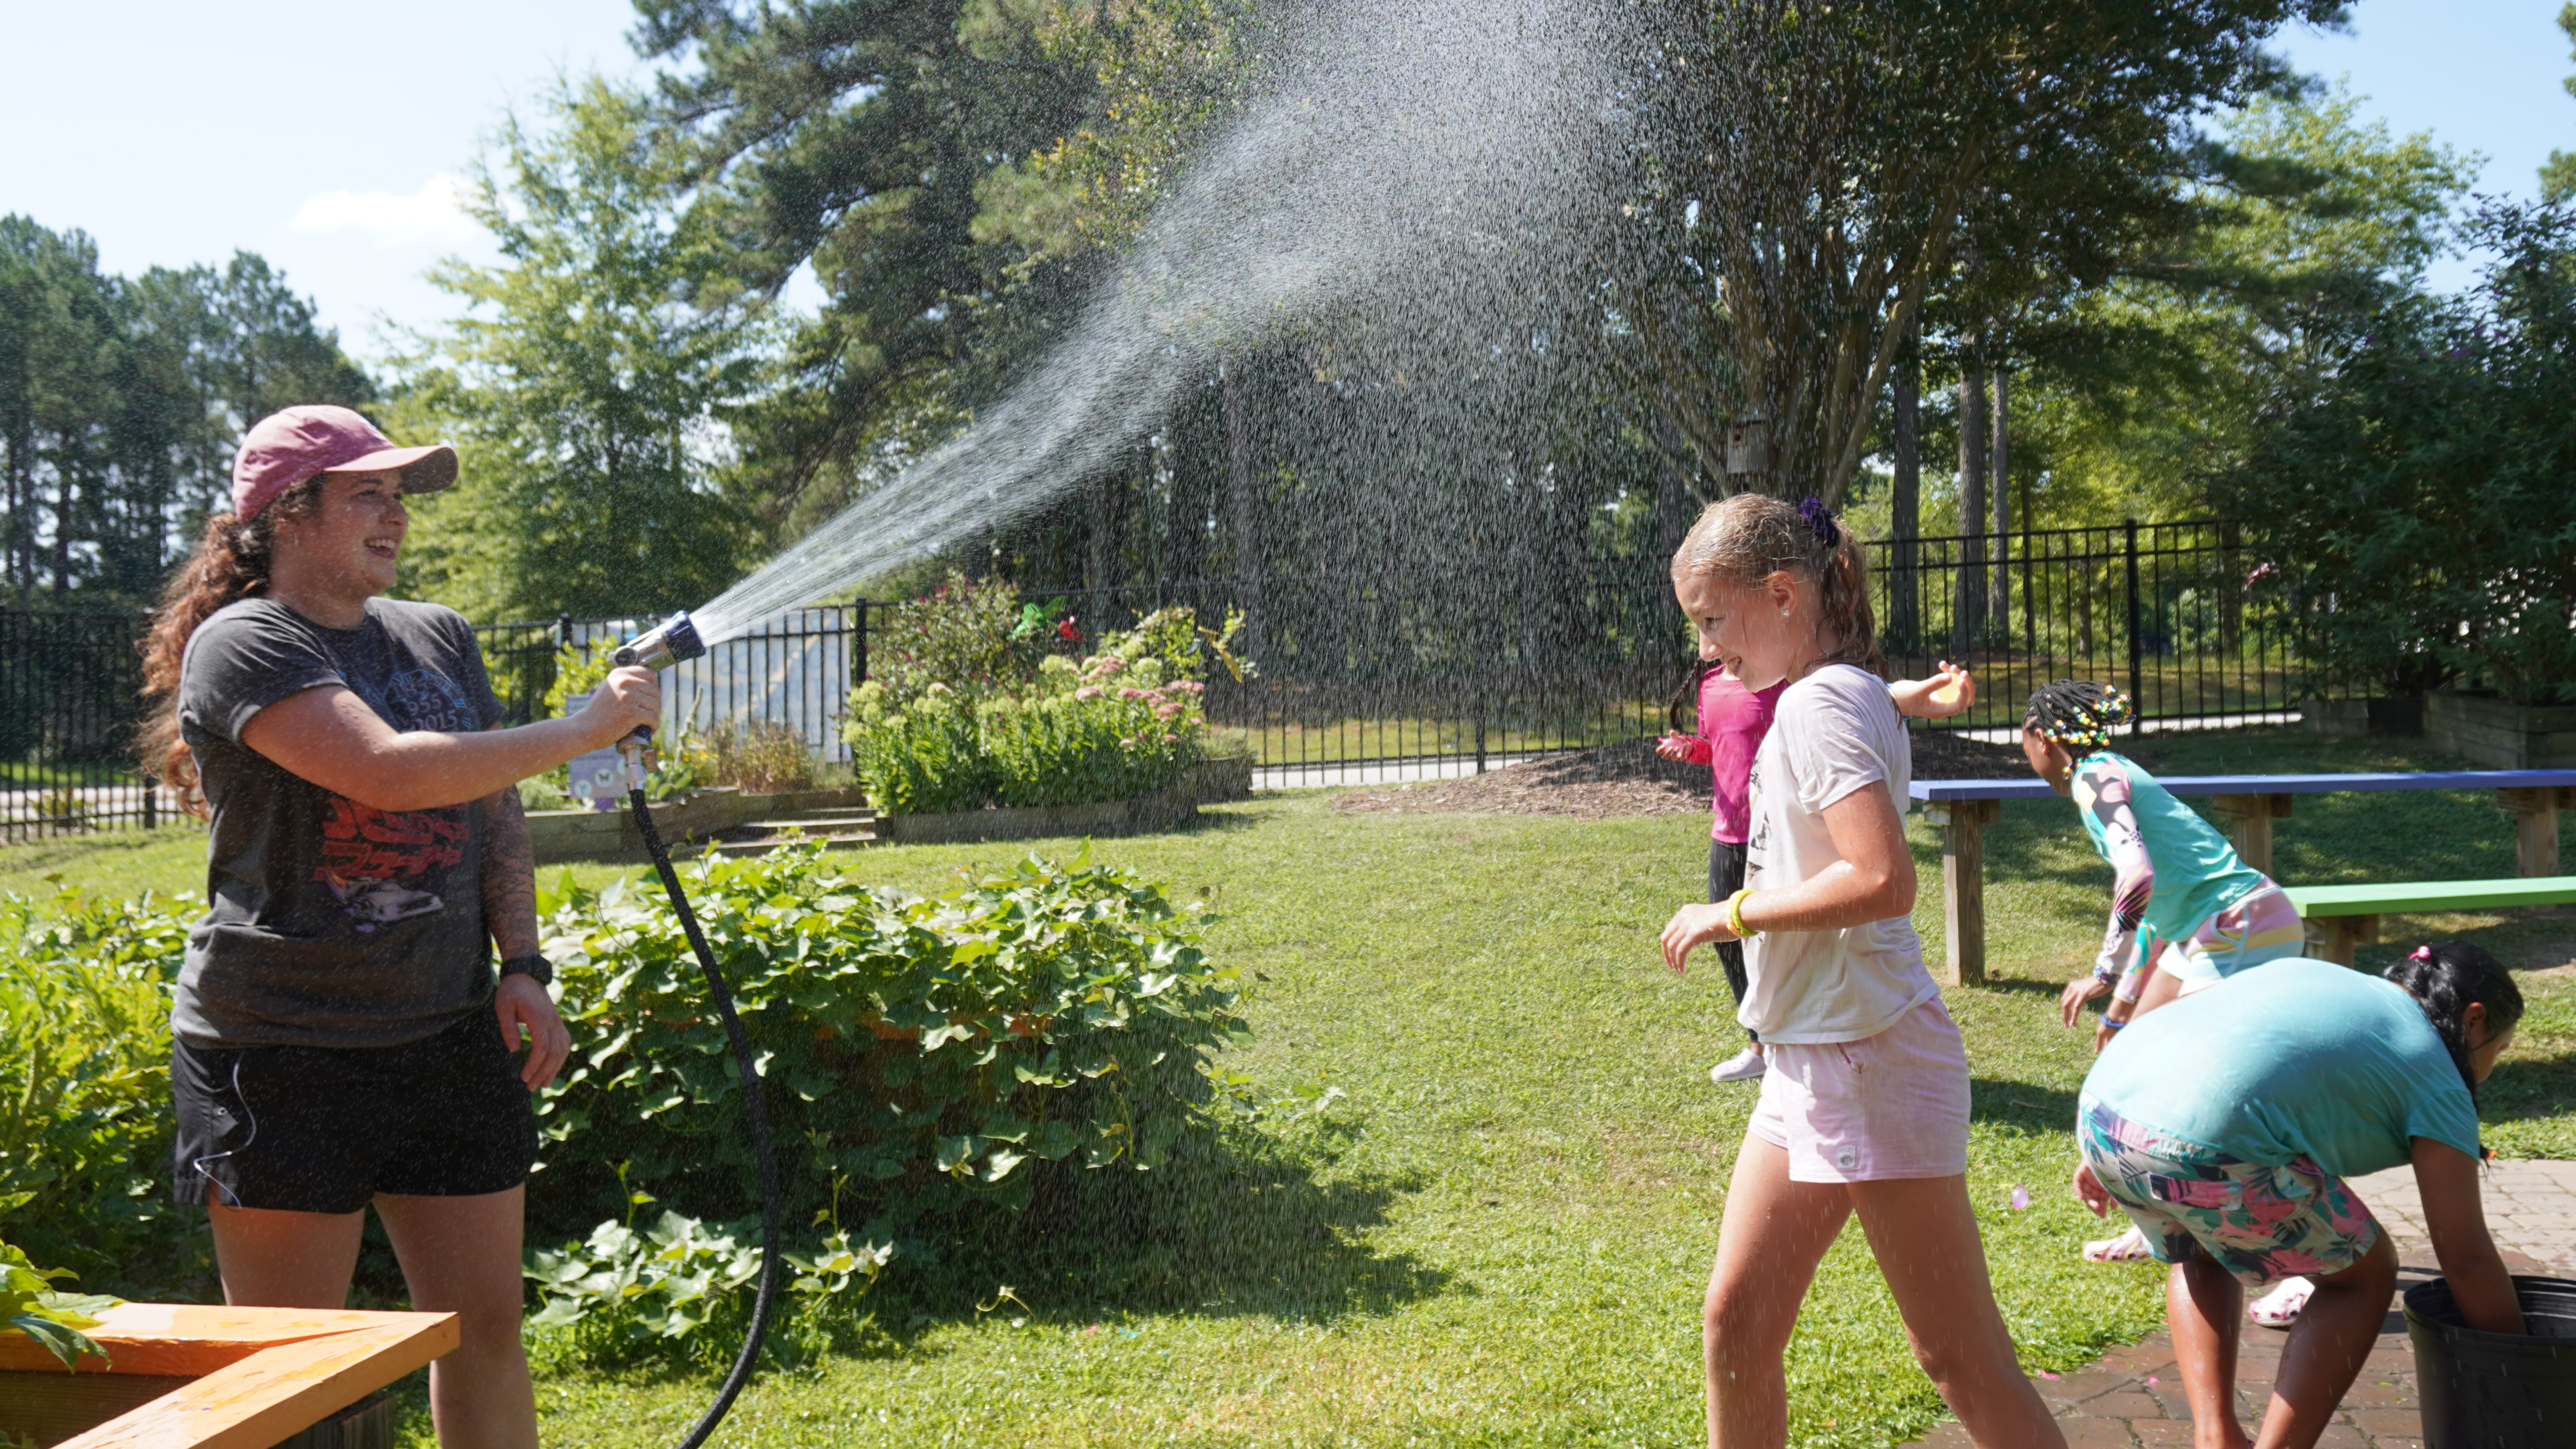 Camp counselor spraying camper with sprinkler. Child is smiling and playing under the water.